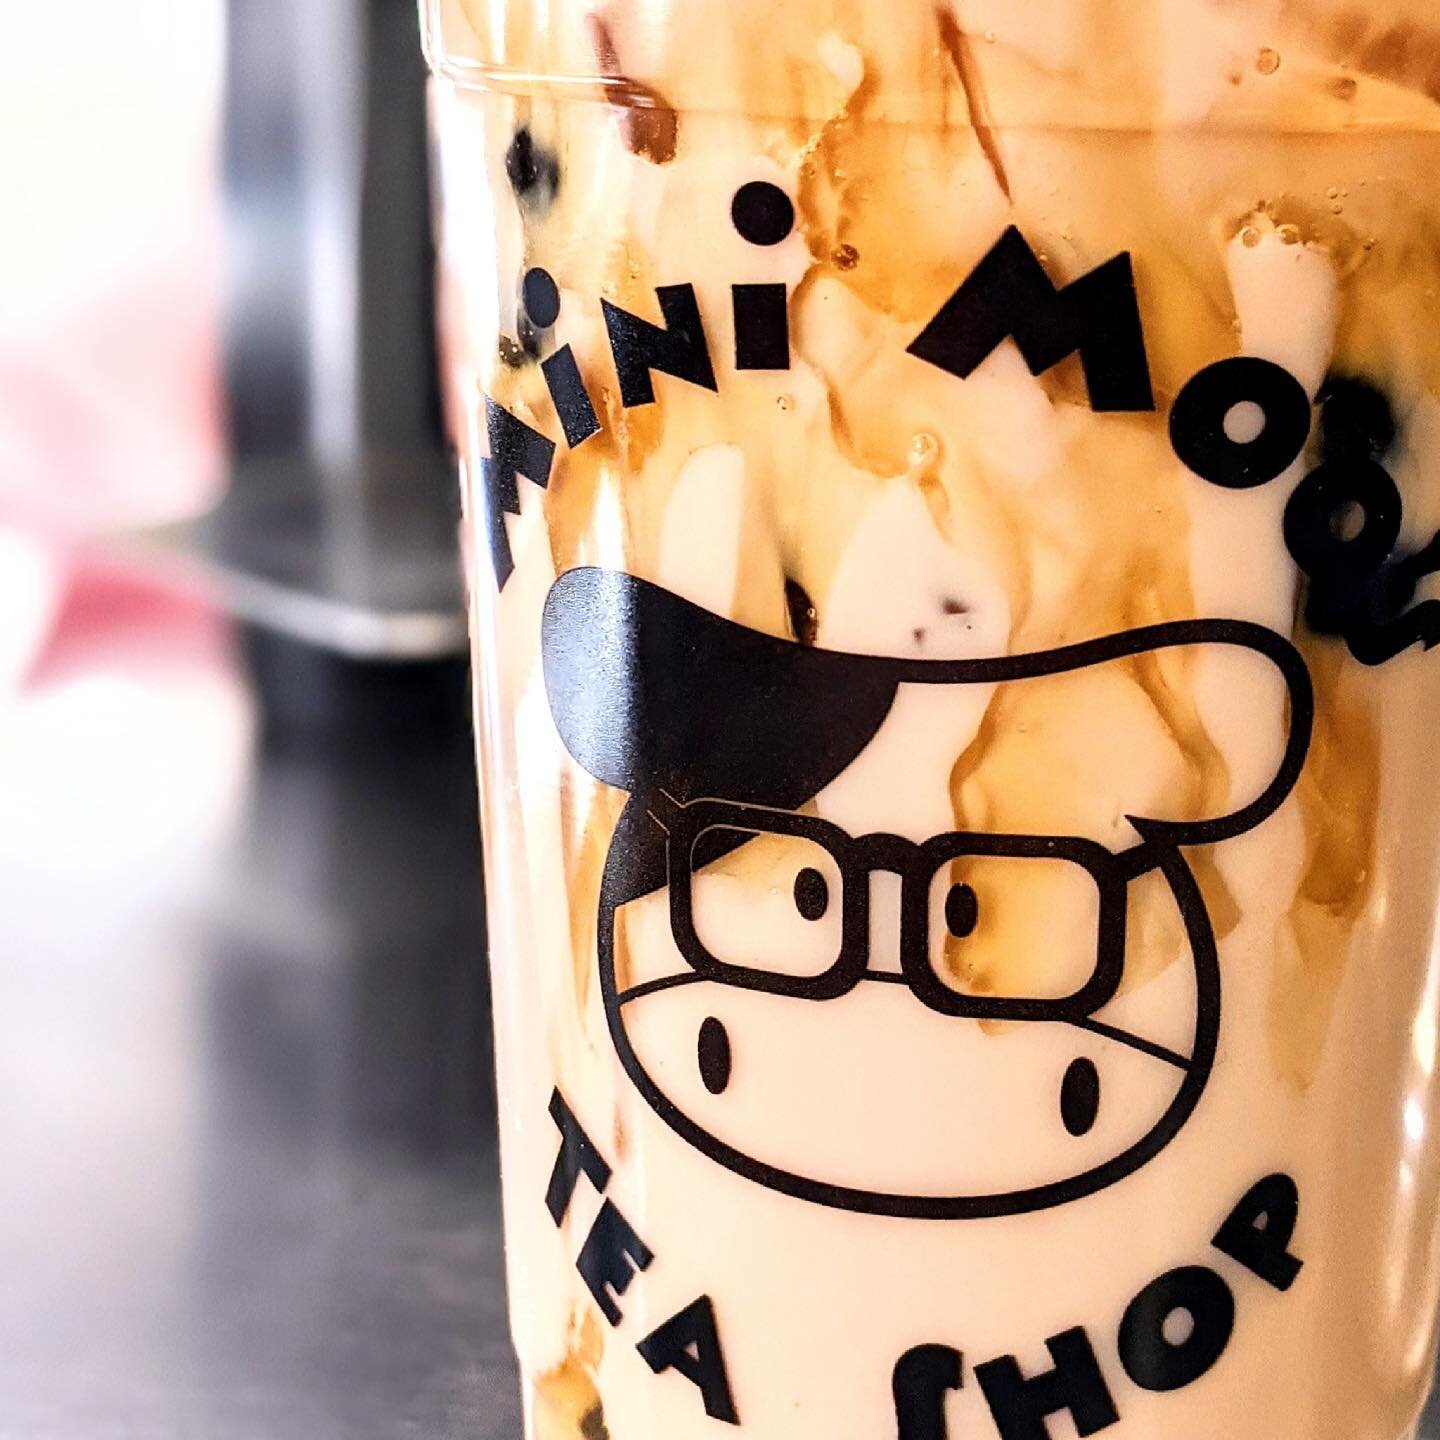 Nothing is better than a honey milk tea on a buzzzyy Monday🐝🍯 Come stop by to test out this special milk tea of the day!  #honey #denverfoodie #denverlocal #denver #denversmallbusiness #bubbletea #denverfoodscene #bobatea